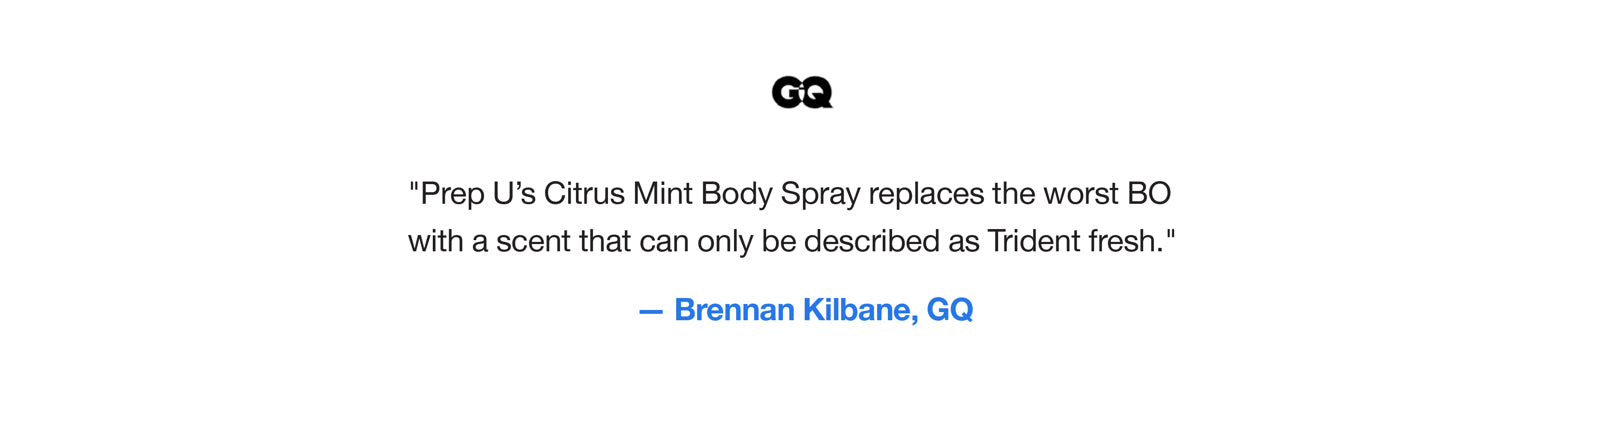 Prep U and GQ product review for Body Spray